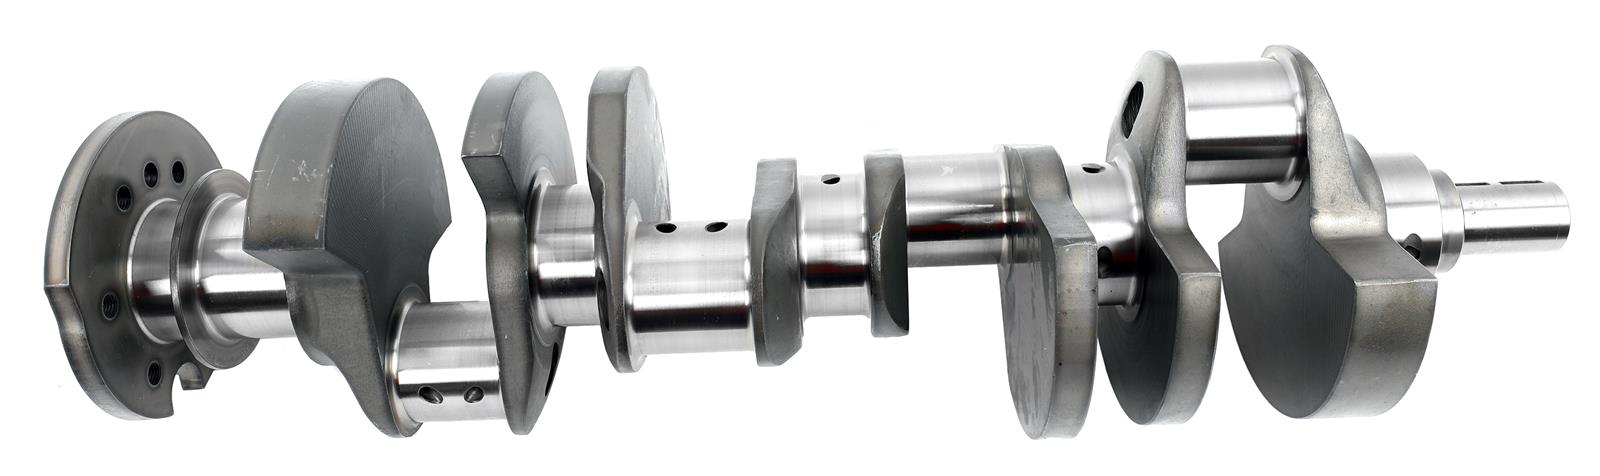 SCAT Engine Components 4-350-3750-6000 Scat Forged Standard Weight  Crankshafts | Summit Racing